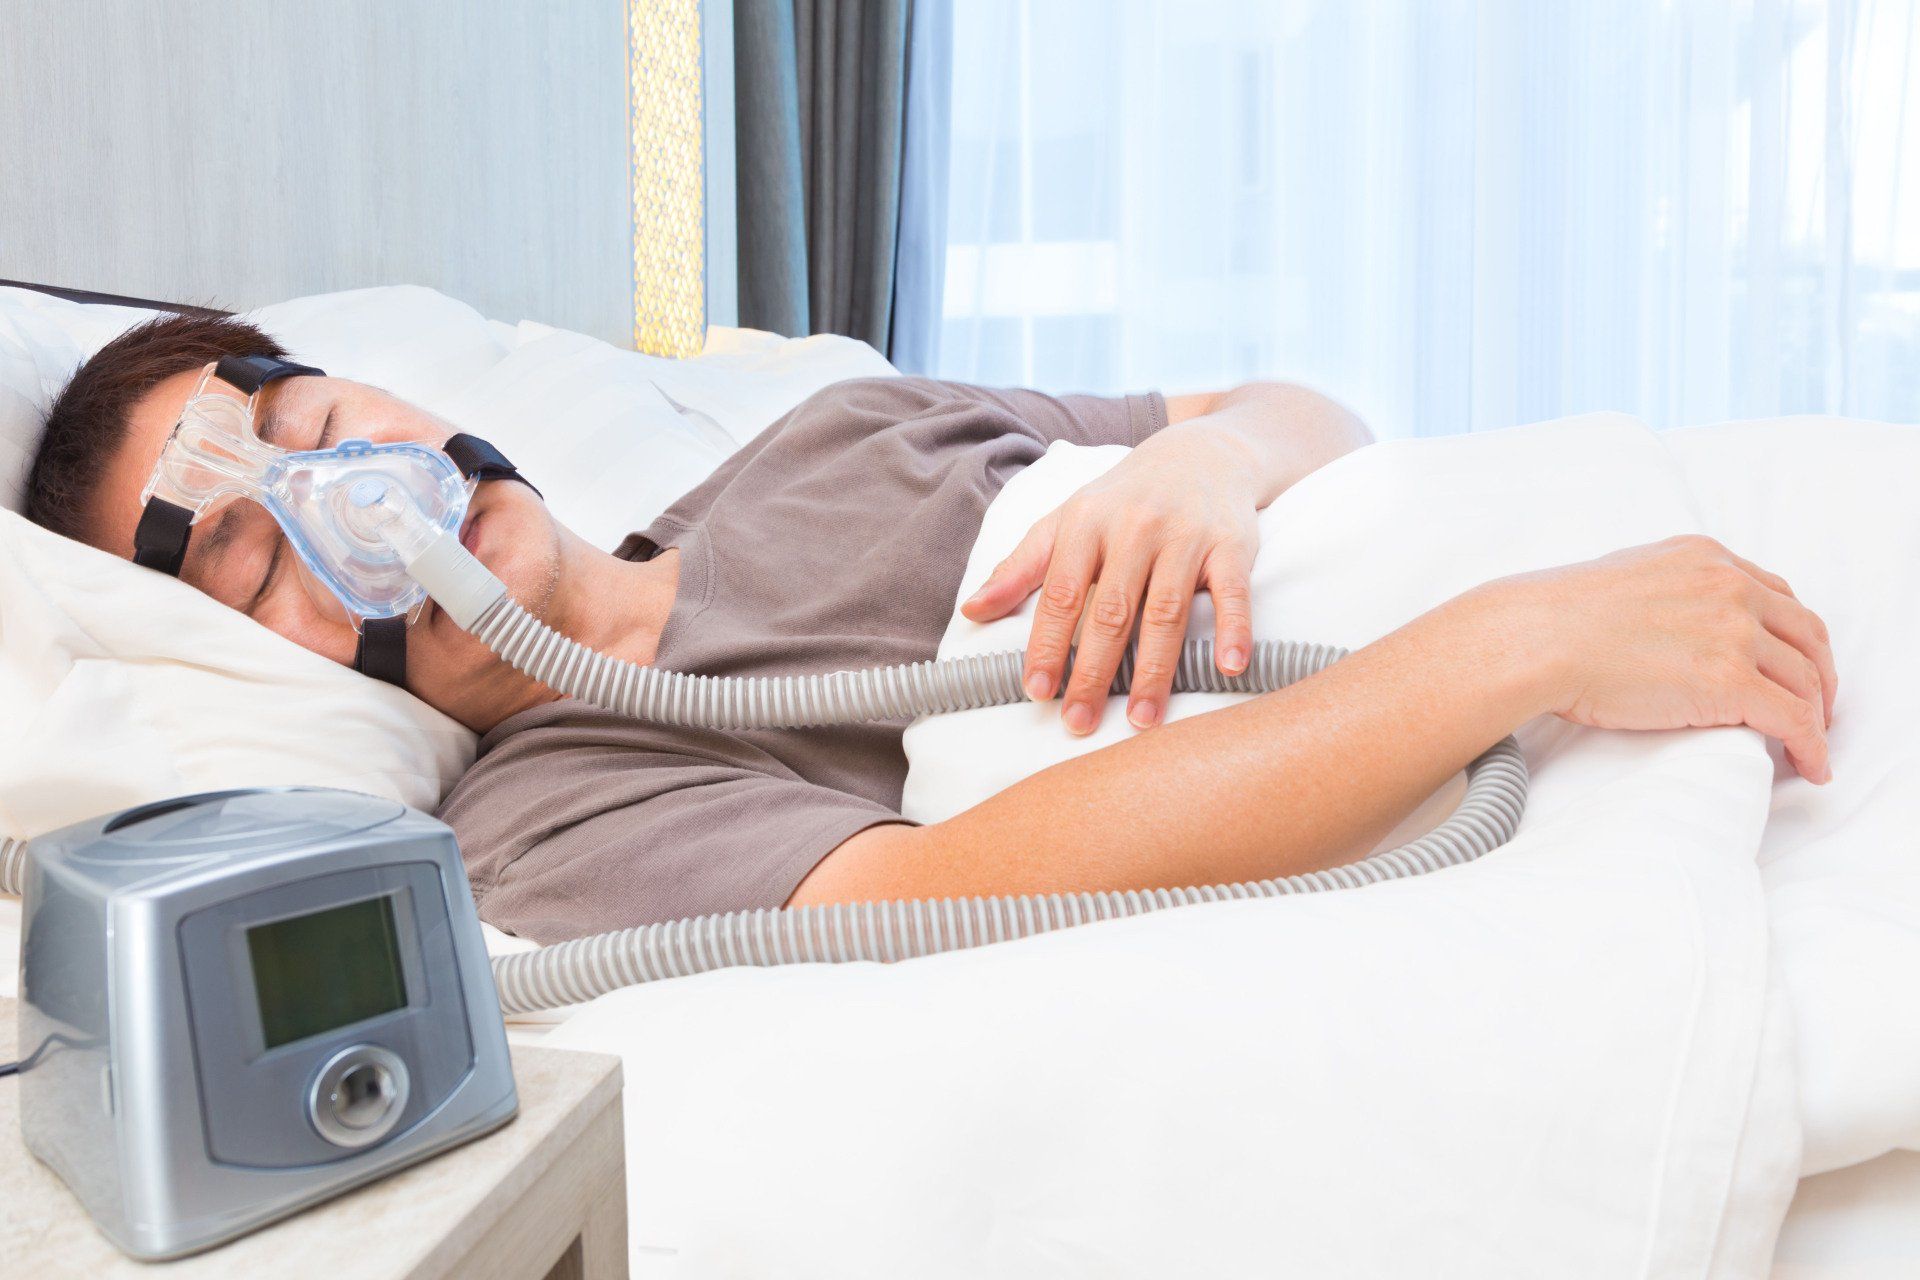 What Are CPAP Machines and How Do They Work?